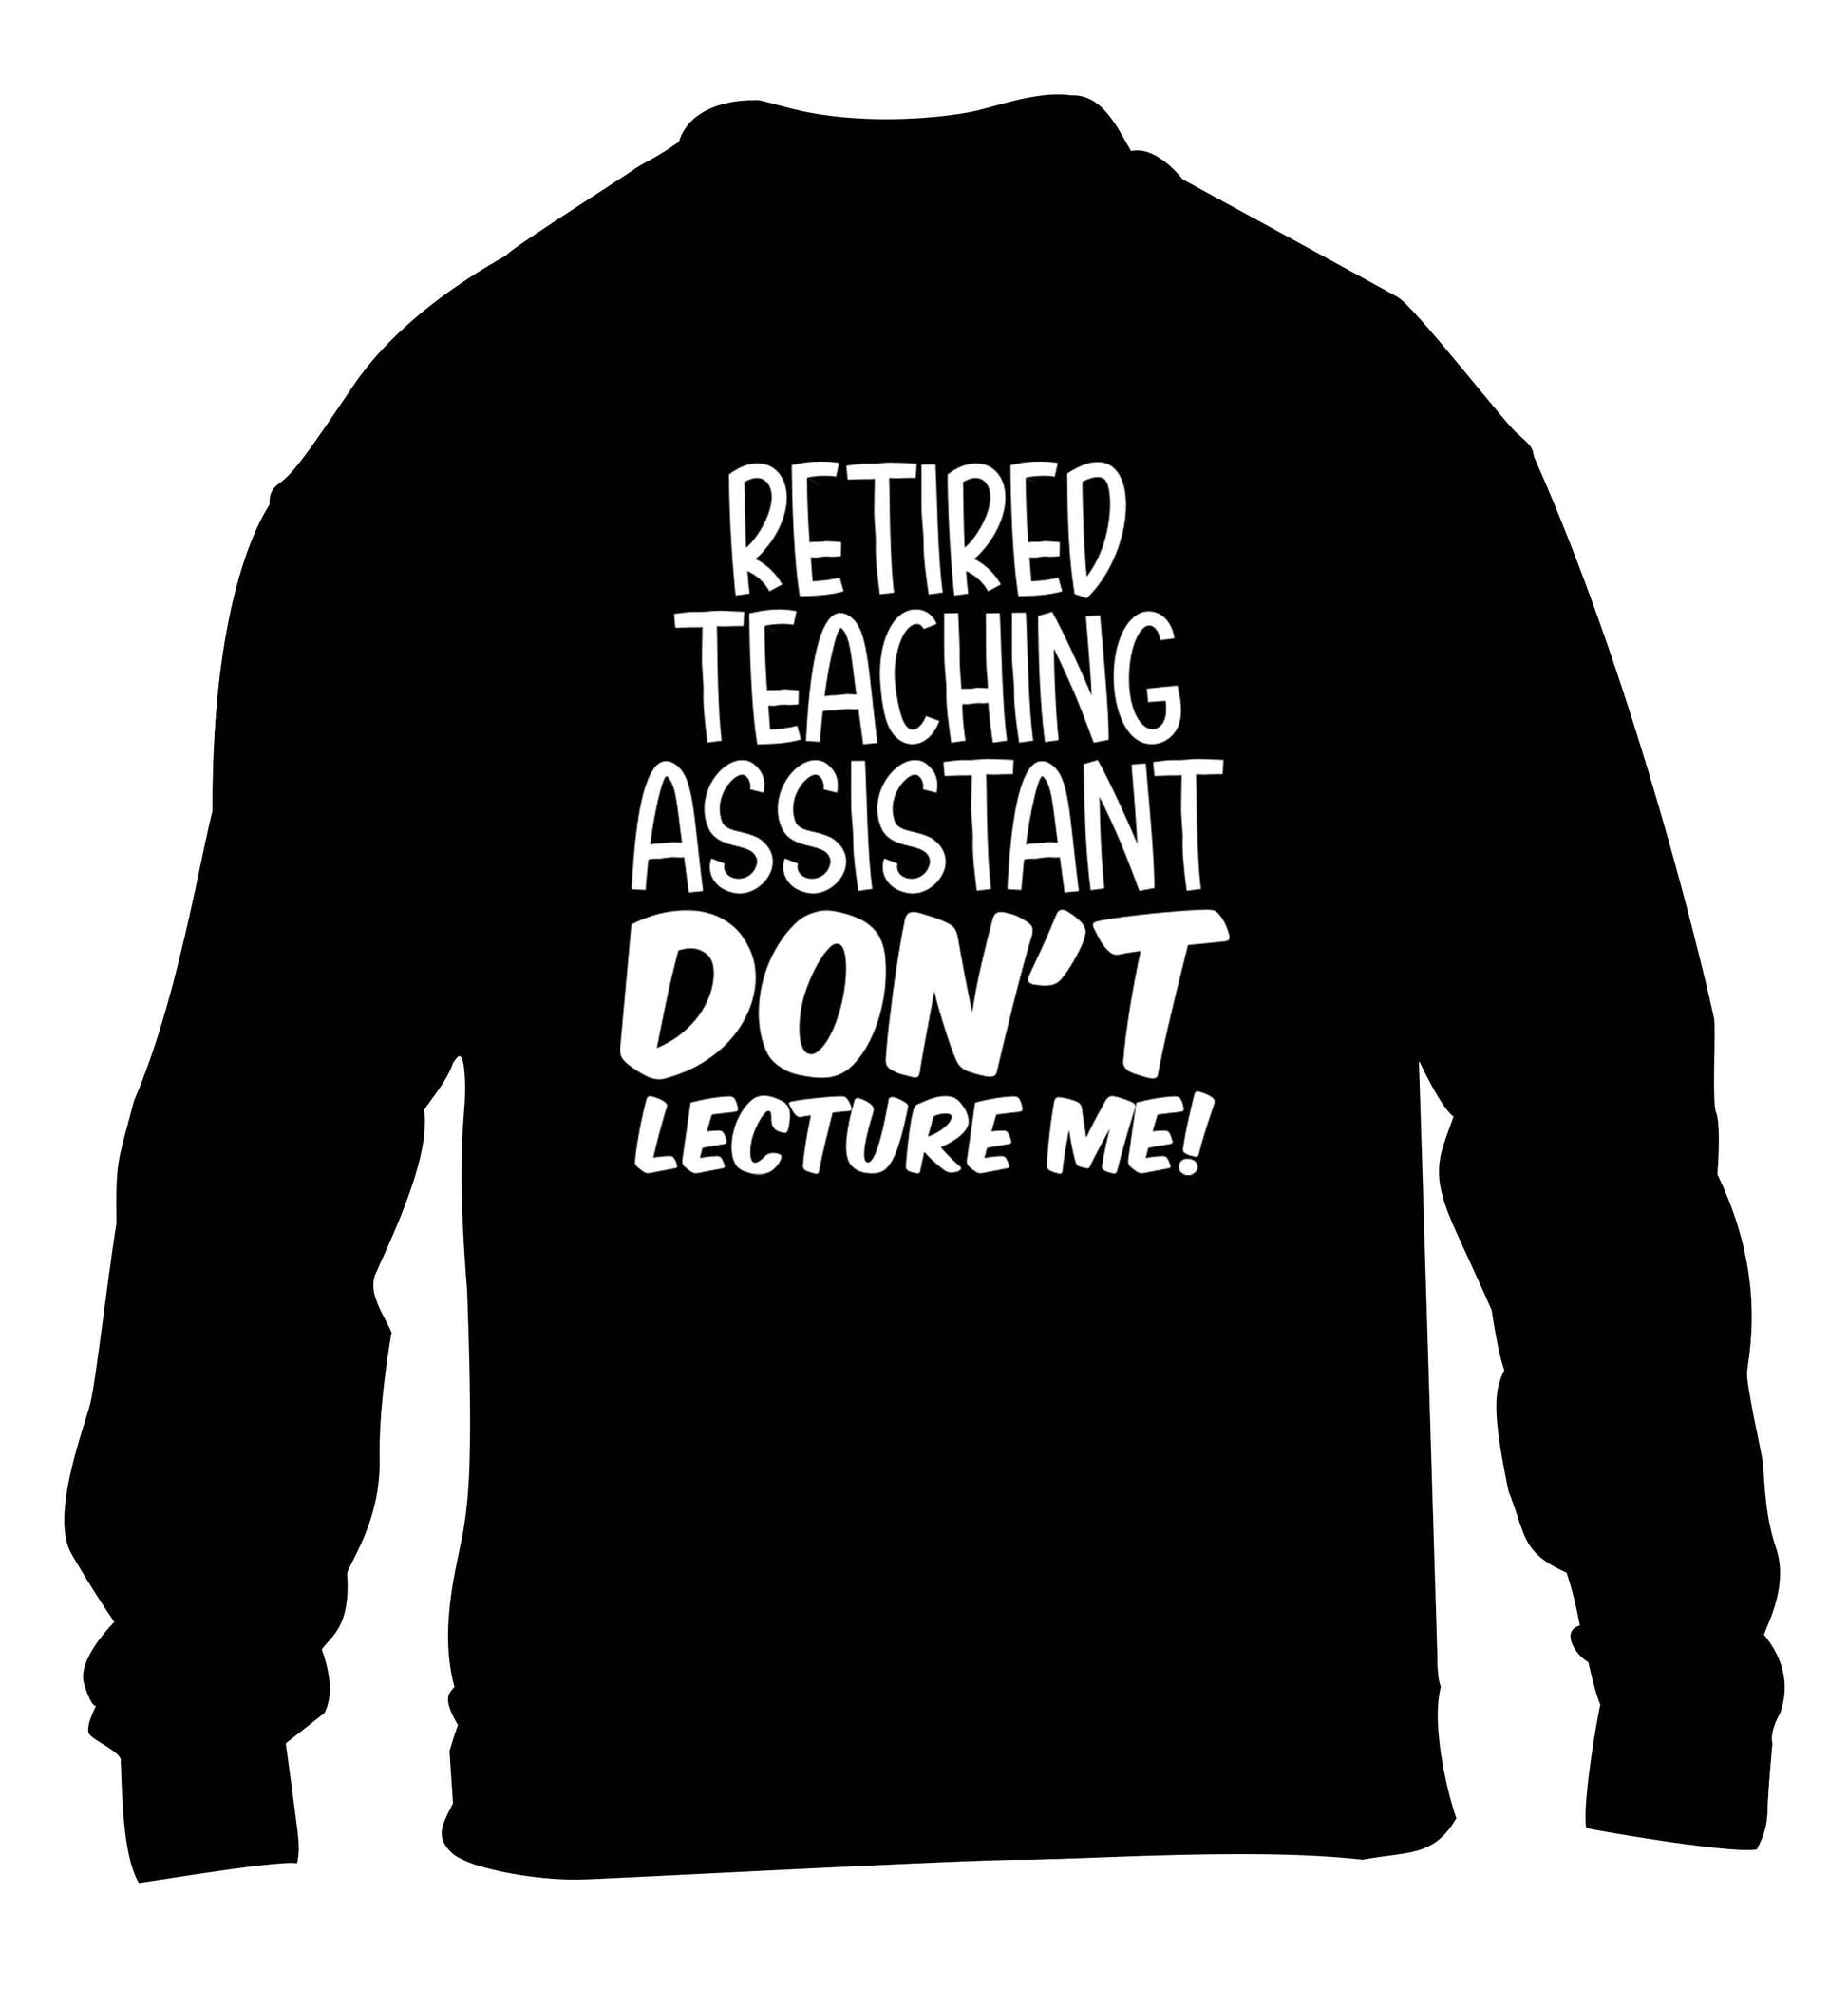 Retired teaching assistant don't lecture me children's black sweater 12-13 Years